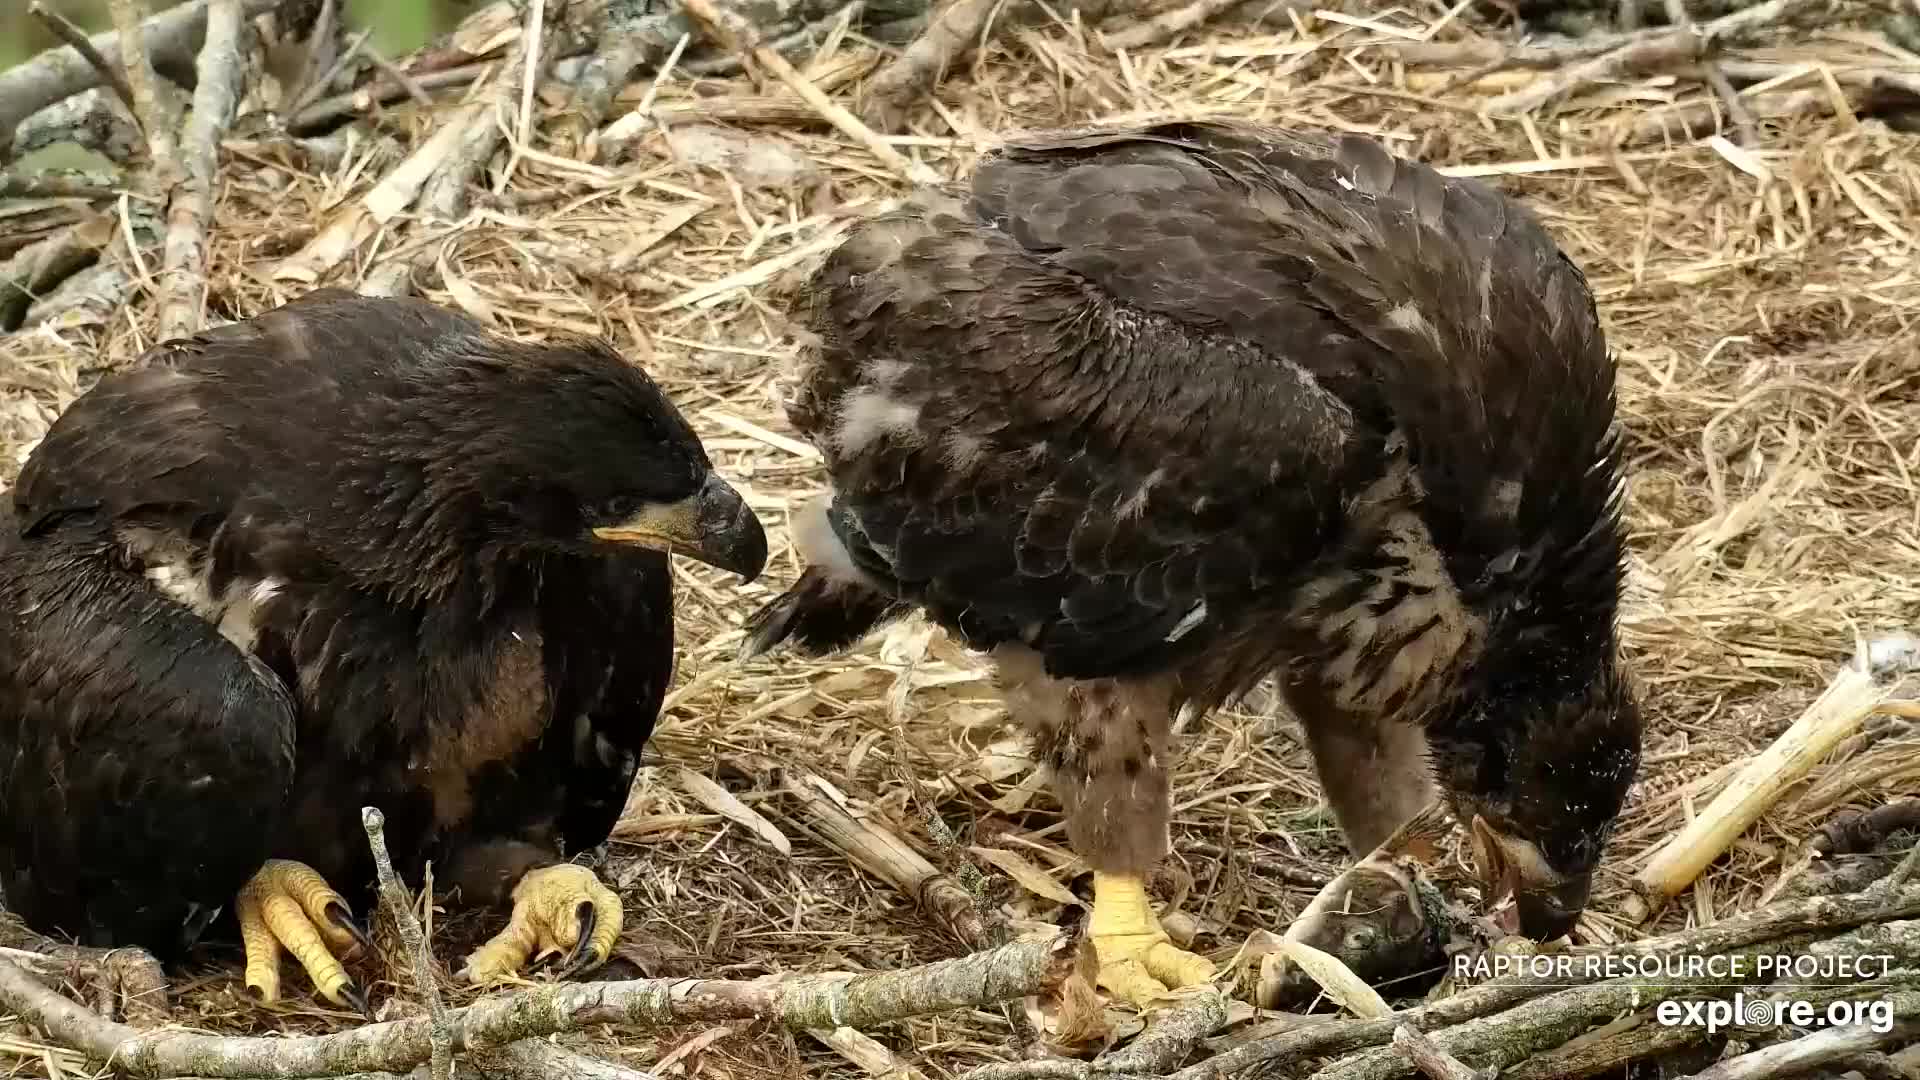 May 10, 2022: Learning Eaglet Table Manners